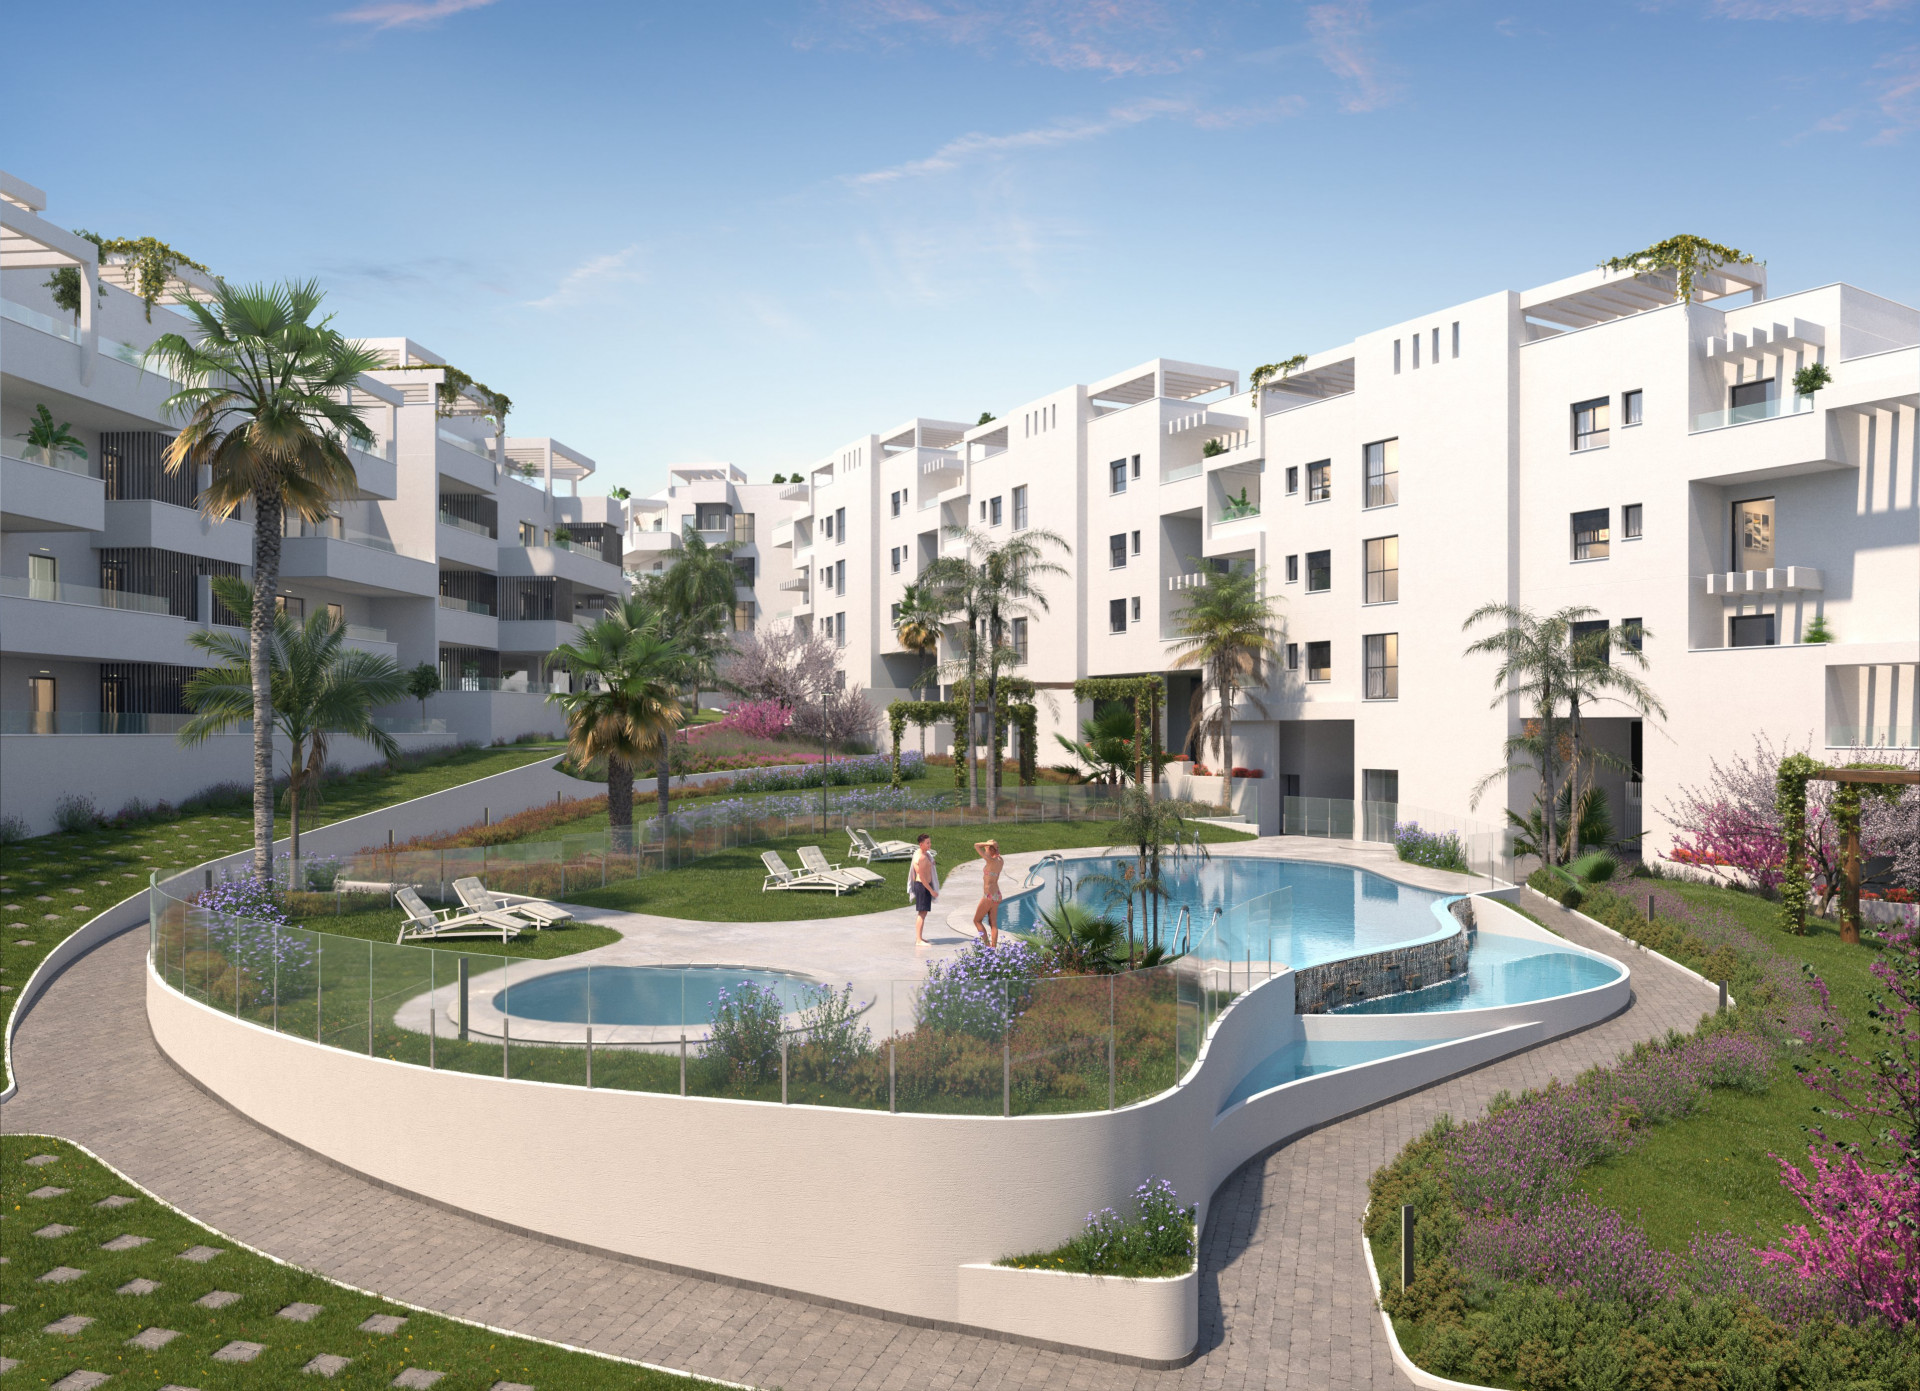 New complex of modern-contemporary apartments for sale in El Limonar - Málaga City